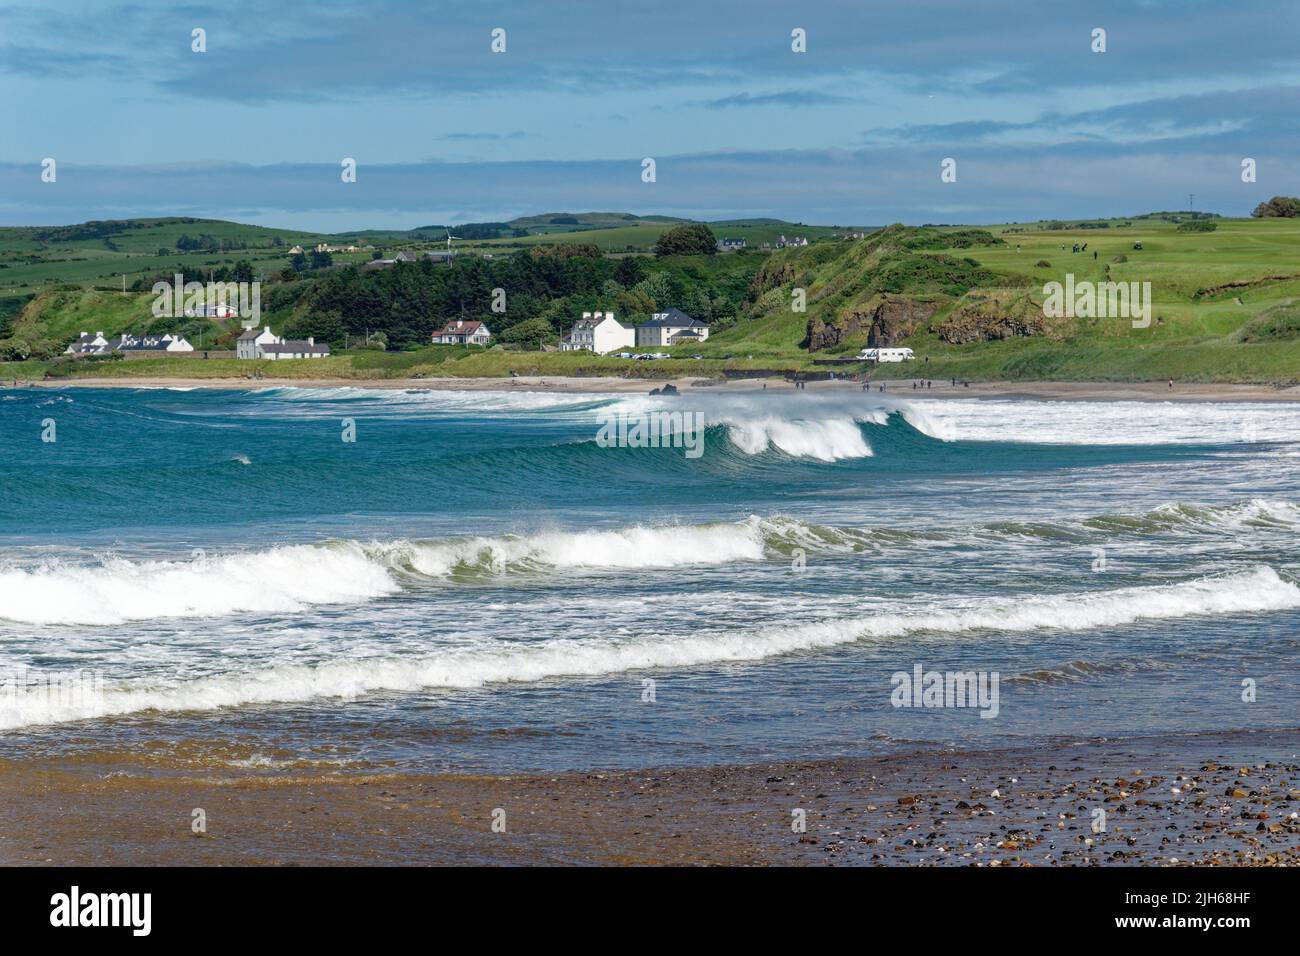 View of the beach at Ballycastle in County Antrim, Northern Ireland Stock Photo